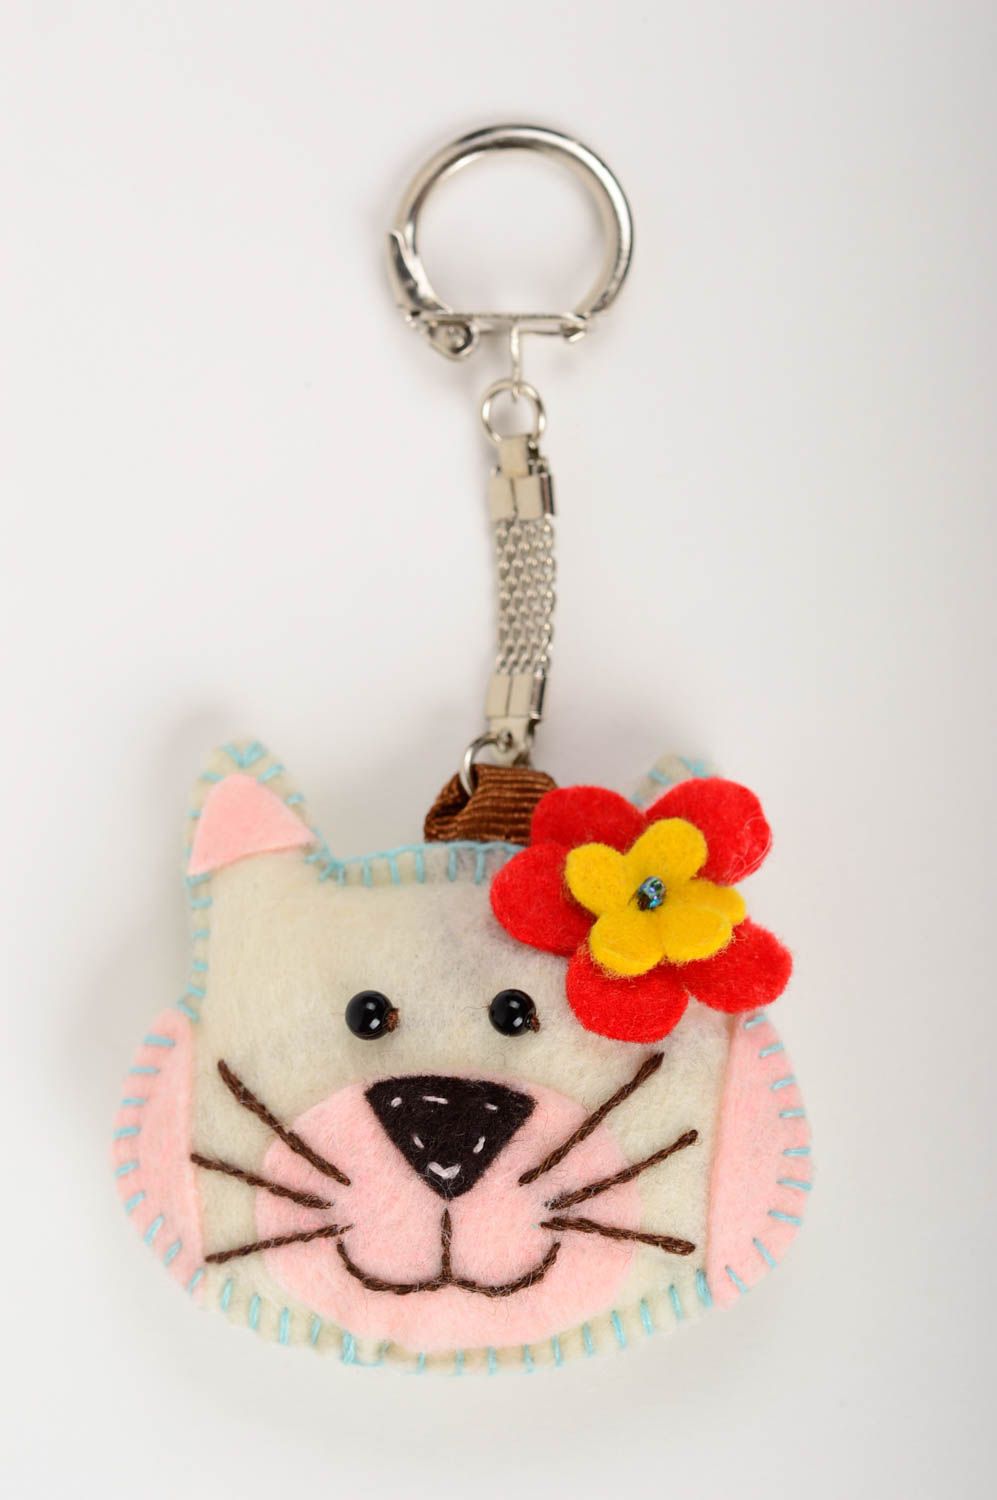 Keychain in shape of cat handmade textile accessories soft cute souvenirs photo 1